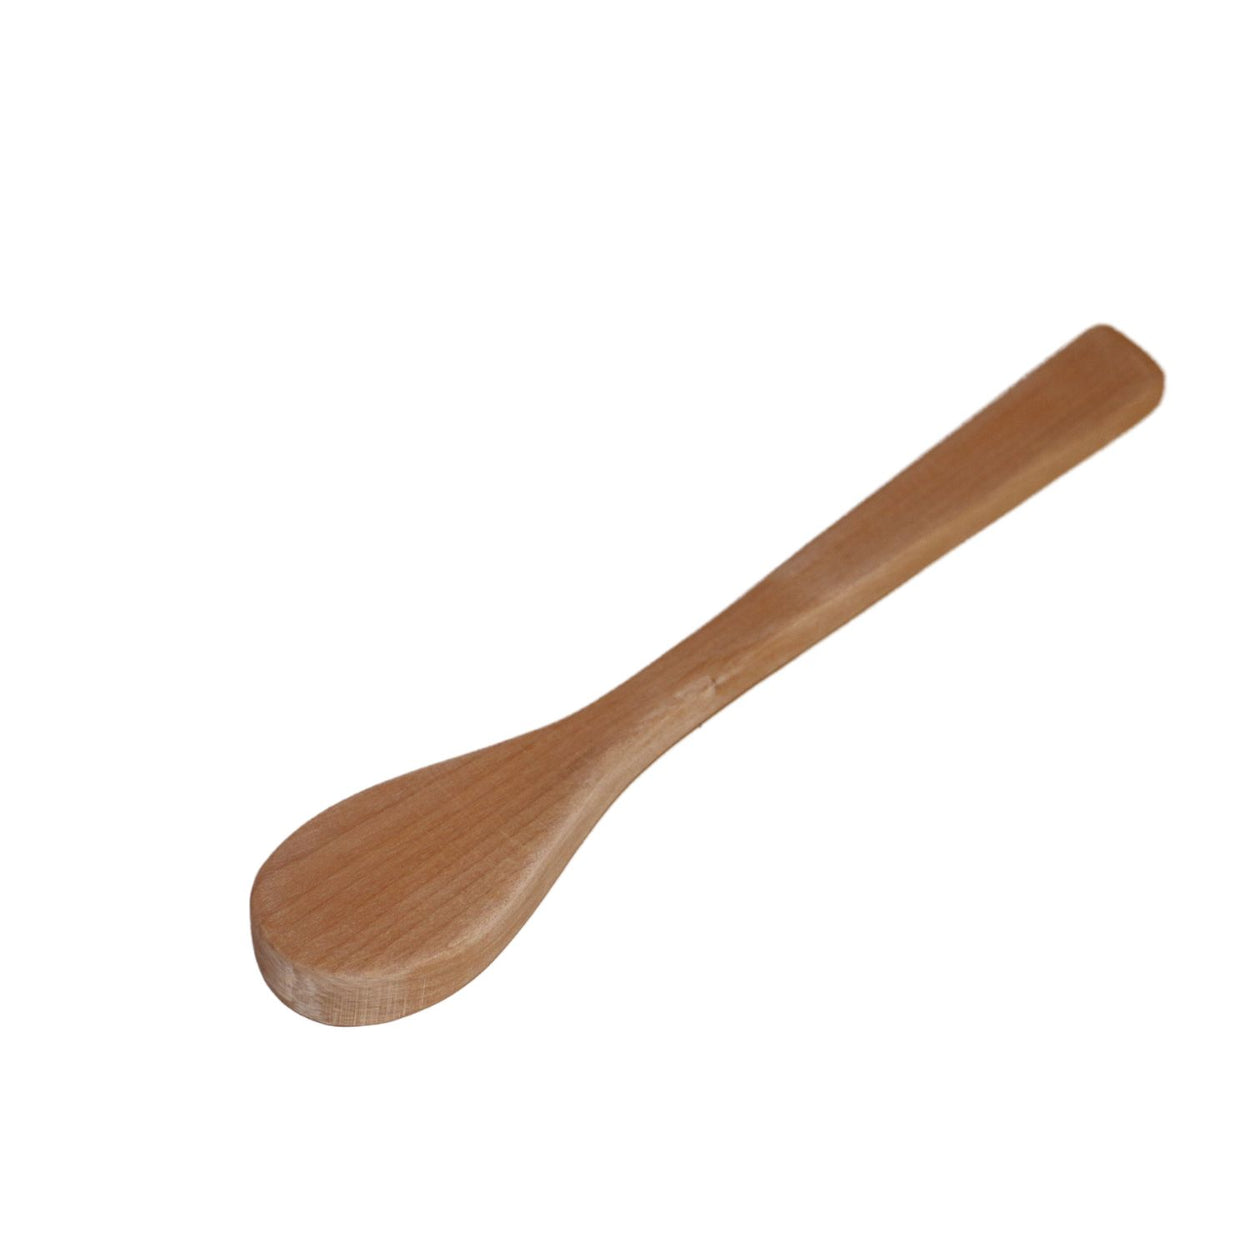 Clay Shaping Paddle